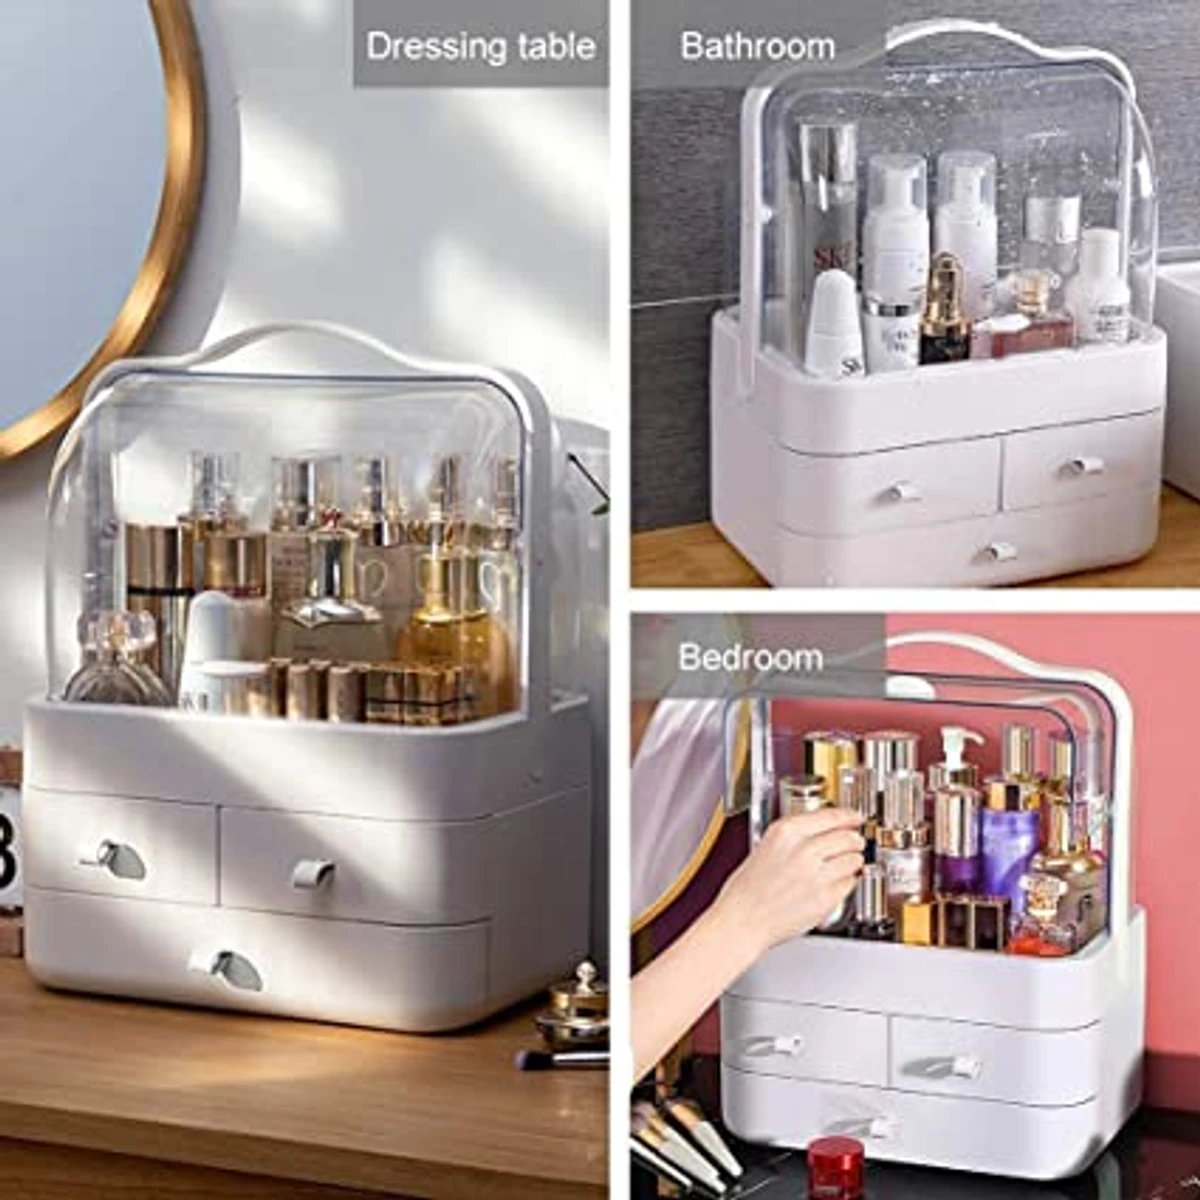 KRIVA ABS Plastic with Acrylic Makeup Cosmetic Storage Box | Dust-Proof Desktop makeup Organizer with 3 drawer For Bathroom |Bedroom|Dressing Table|Lipstick Skincare Holder Great for Countertop(1pcs)